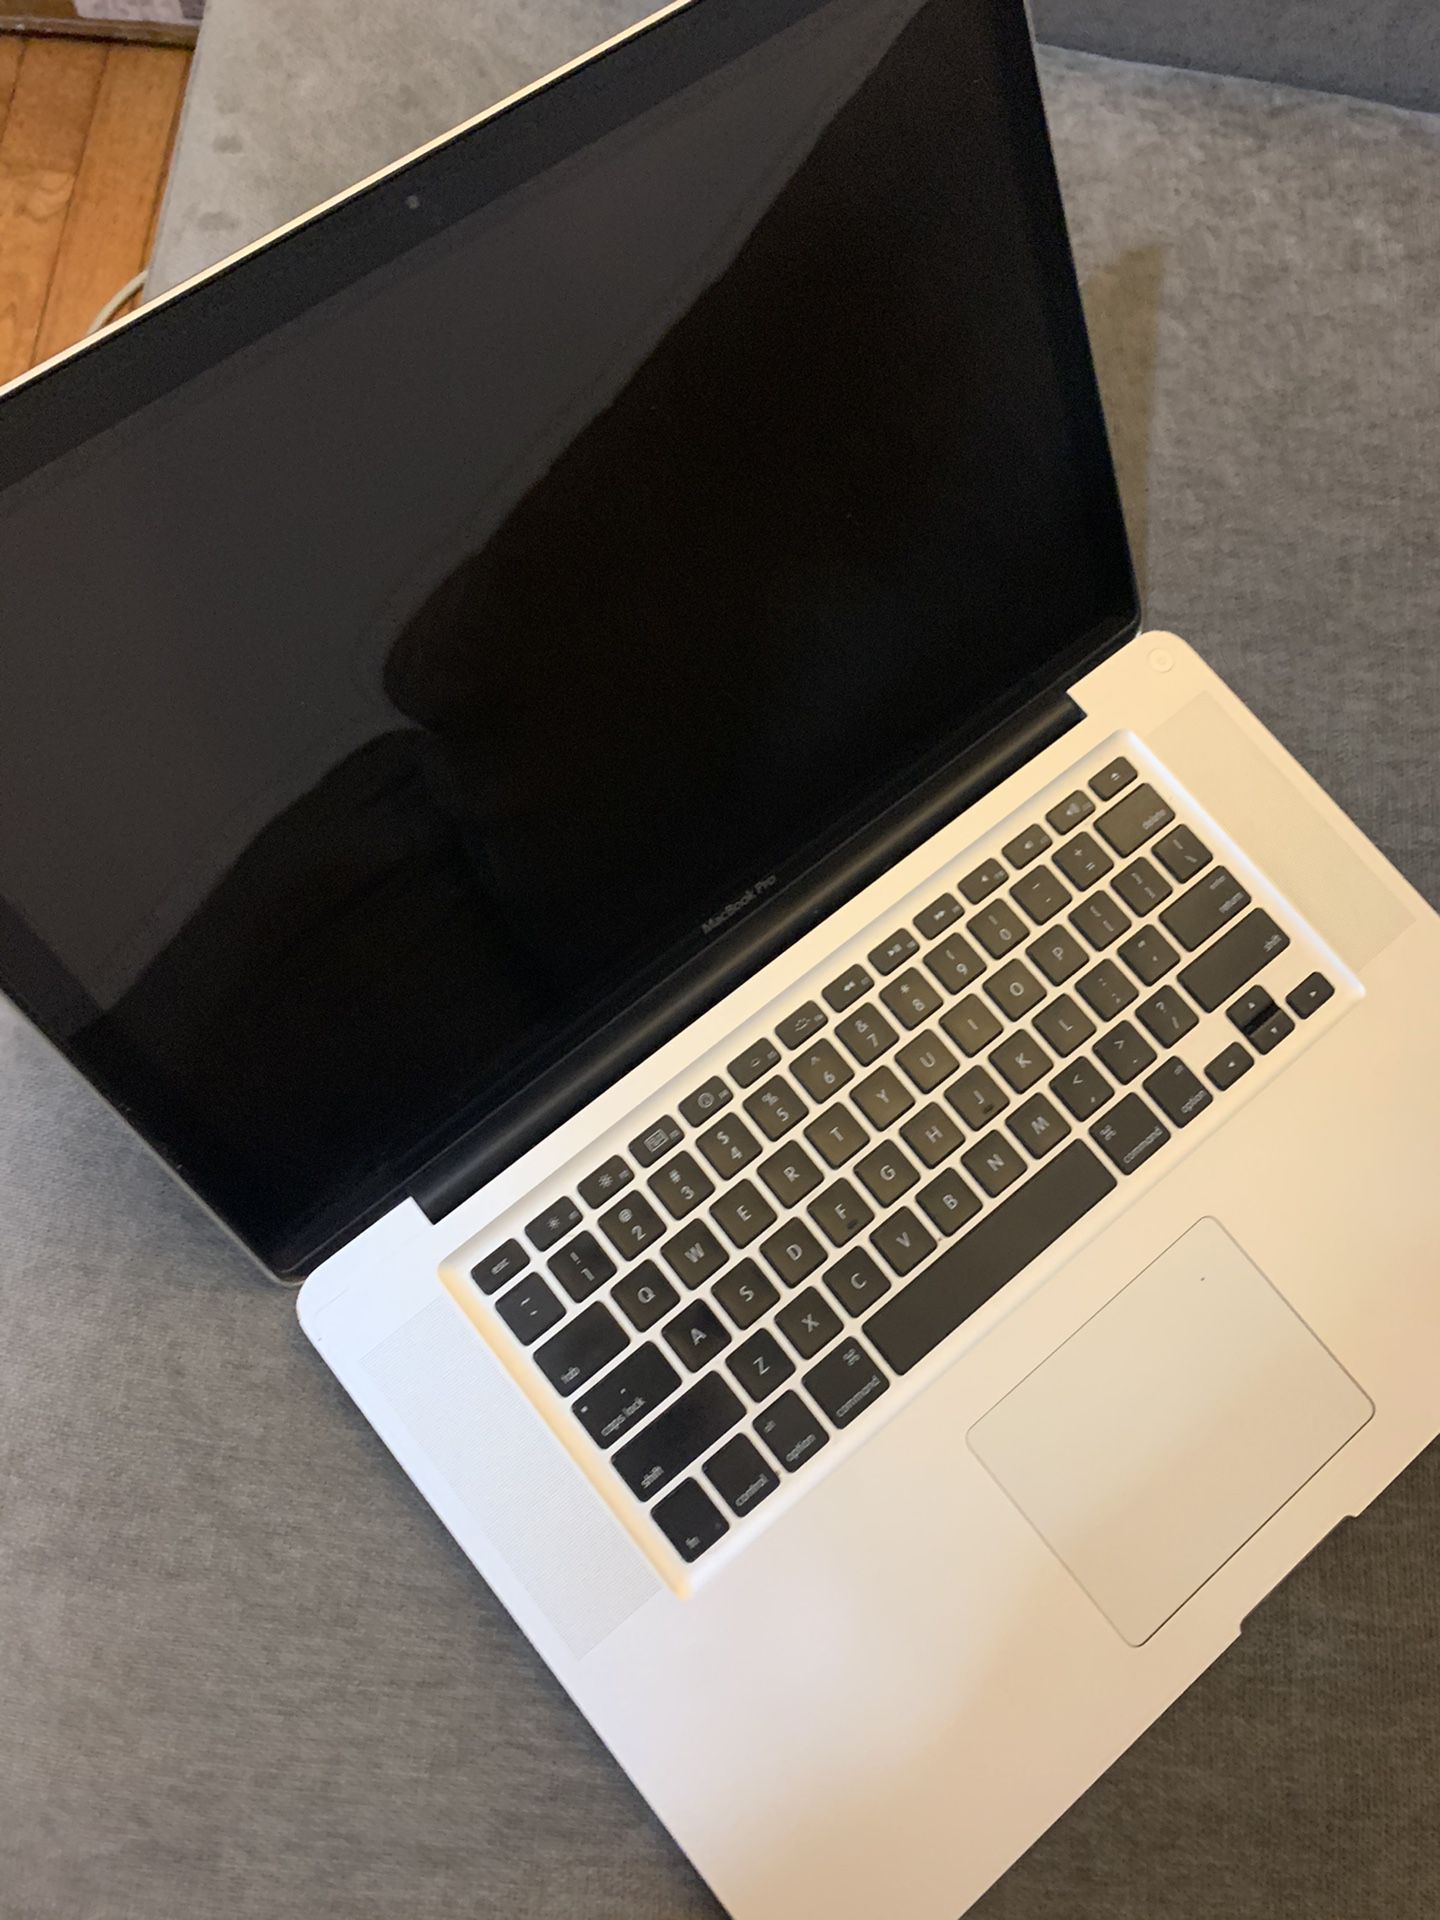 Used MacBook Pro 17” (early 2010)